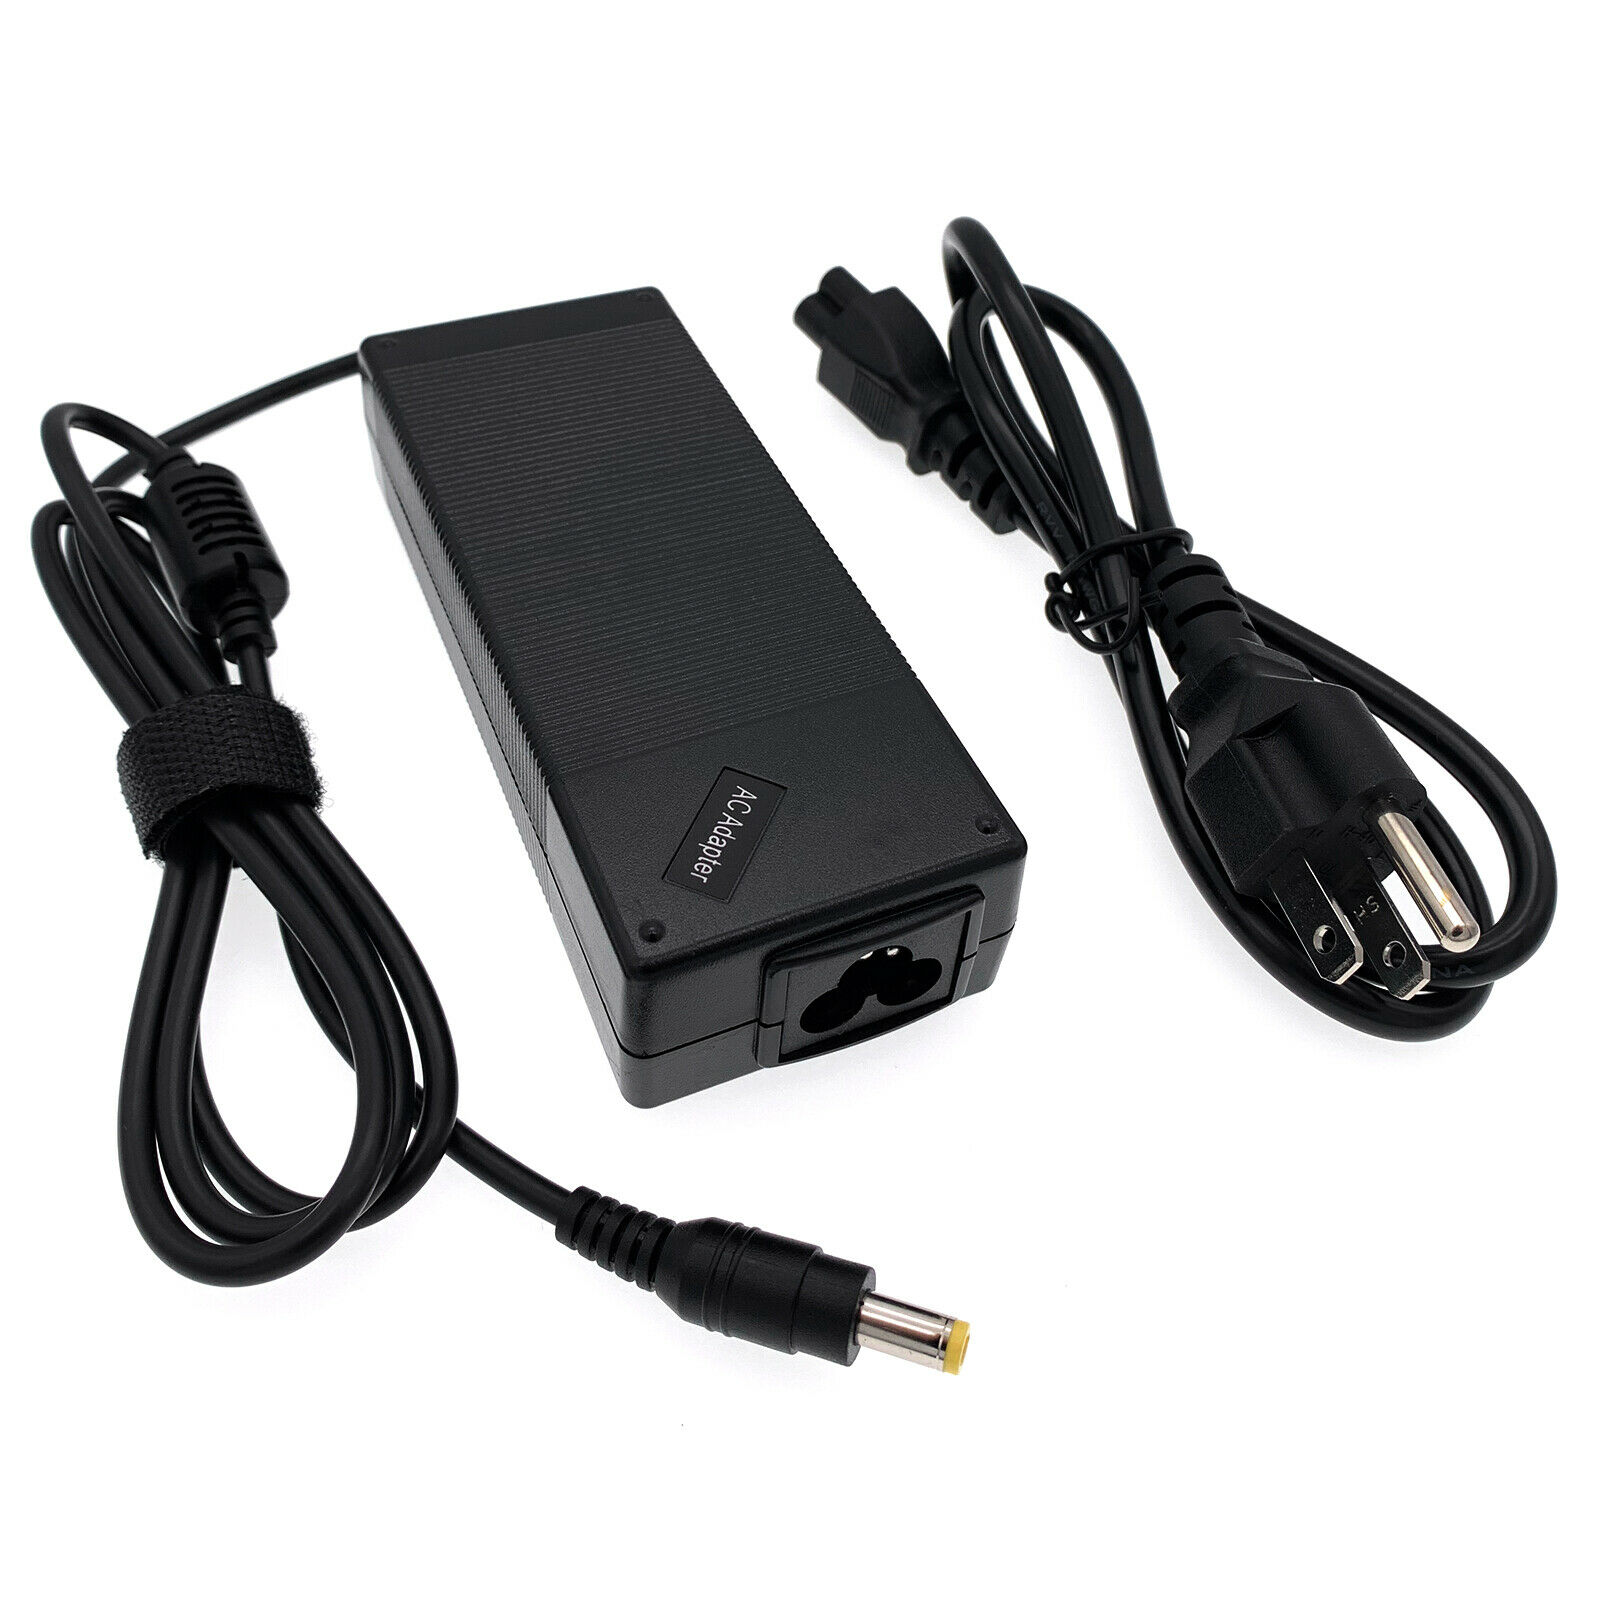 AC Adapter Charger For Panasonic Toughbook CF-19 CF-31 CF-52 CF-53 Power & Cord - image 4 of 6